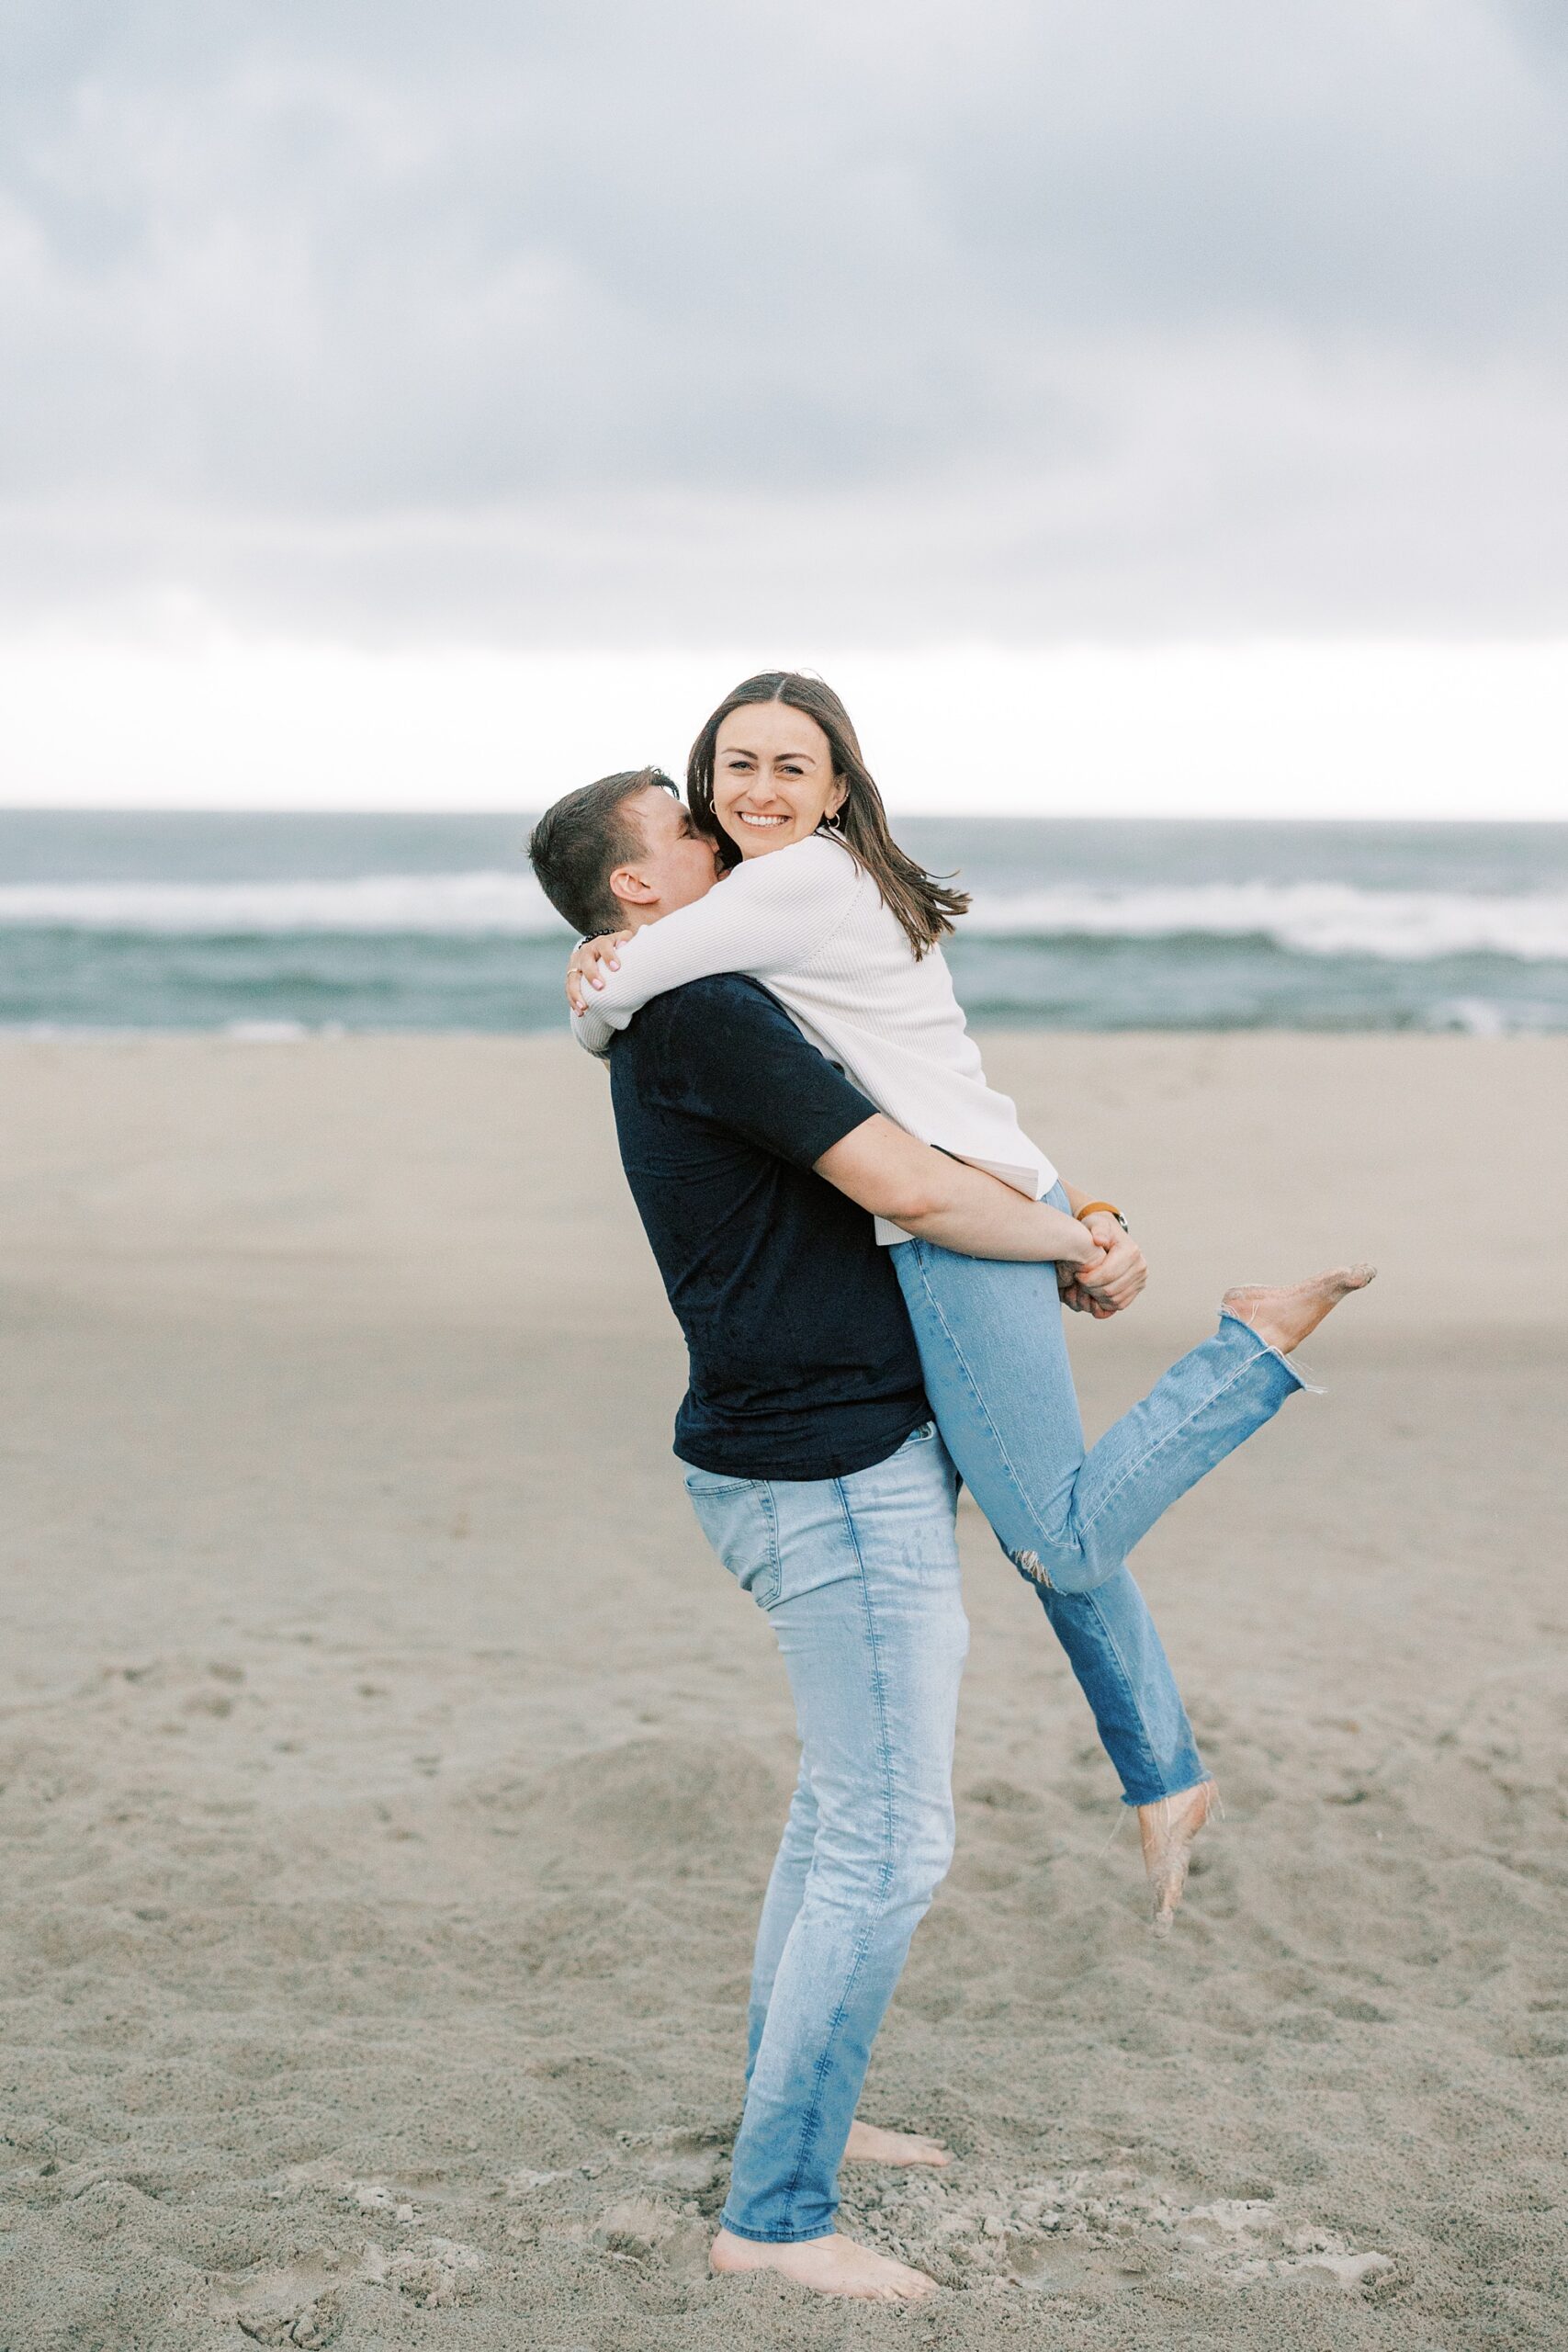 man in black shirt lifts up woman in white sweater on beach during Ocean City NJ engagement photos